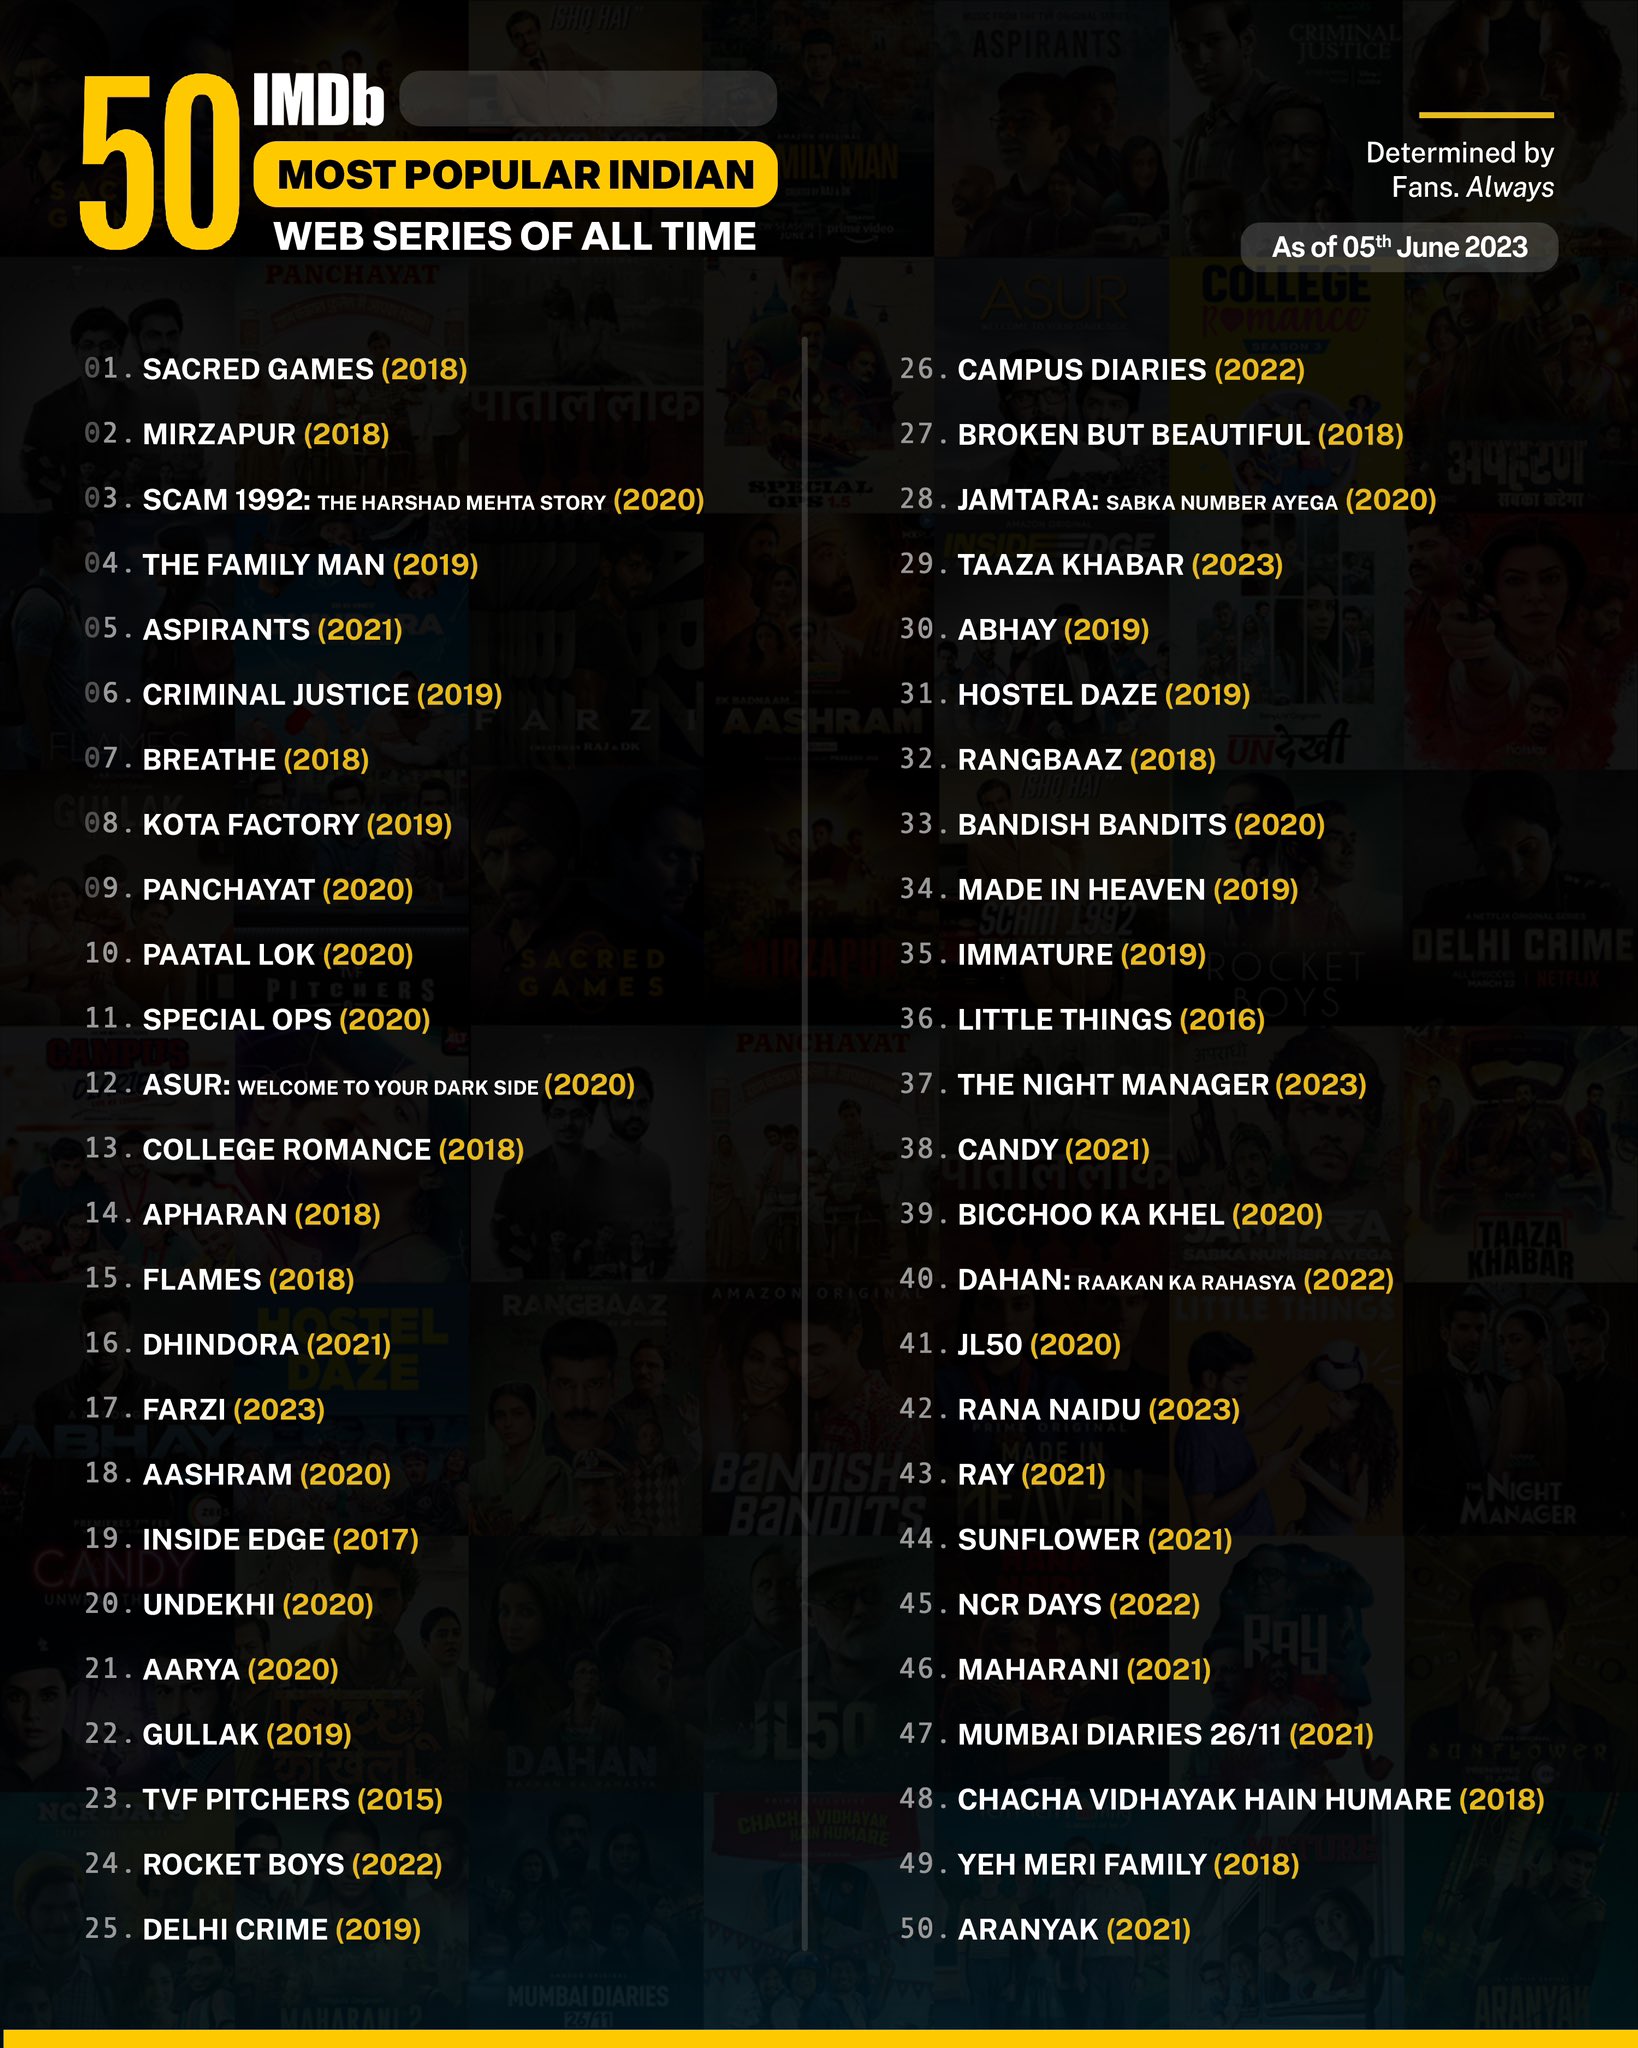 IMDb Releases 50 Most Popular Indian Web Series List Of All Time, How